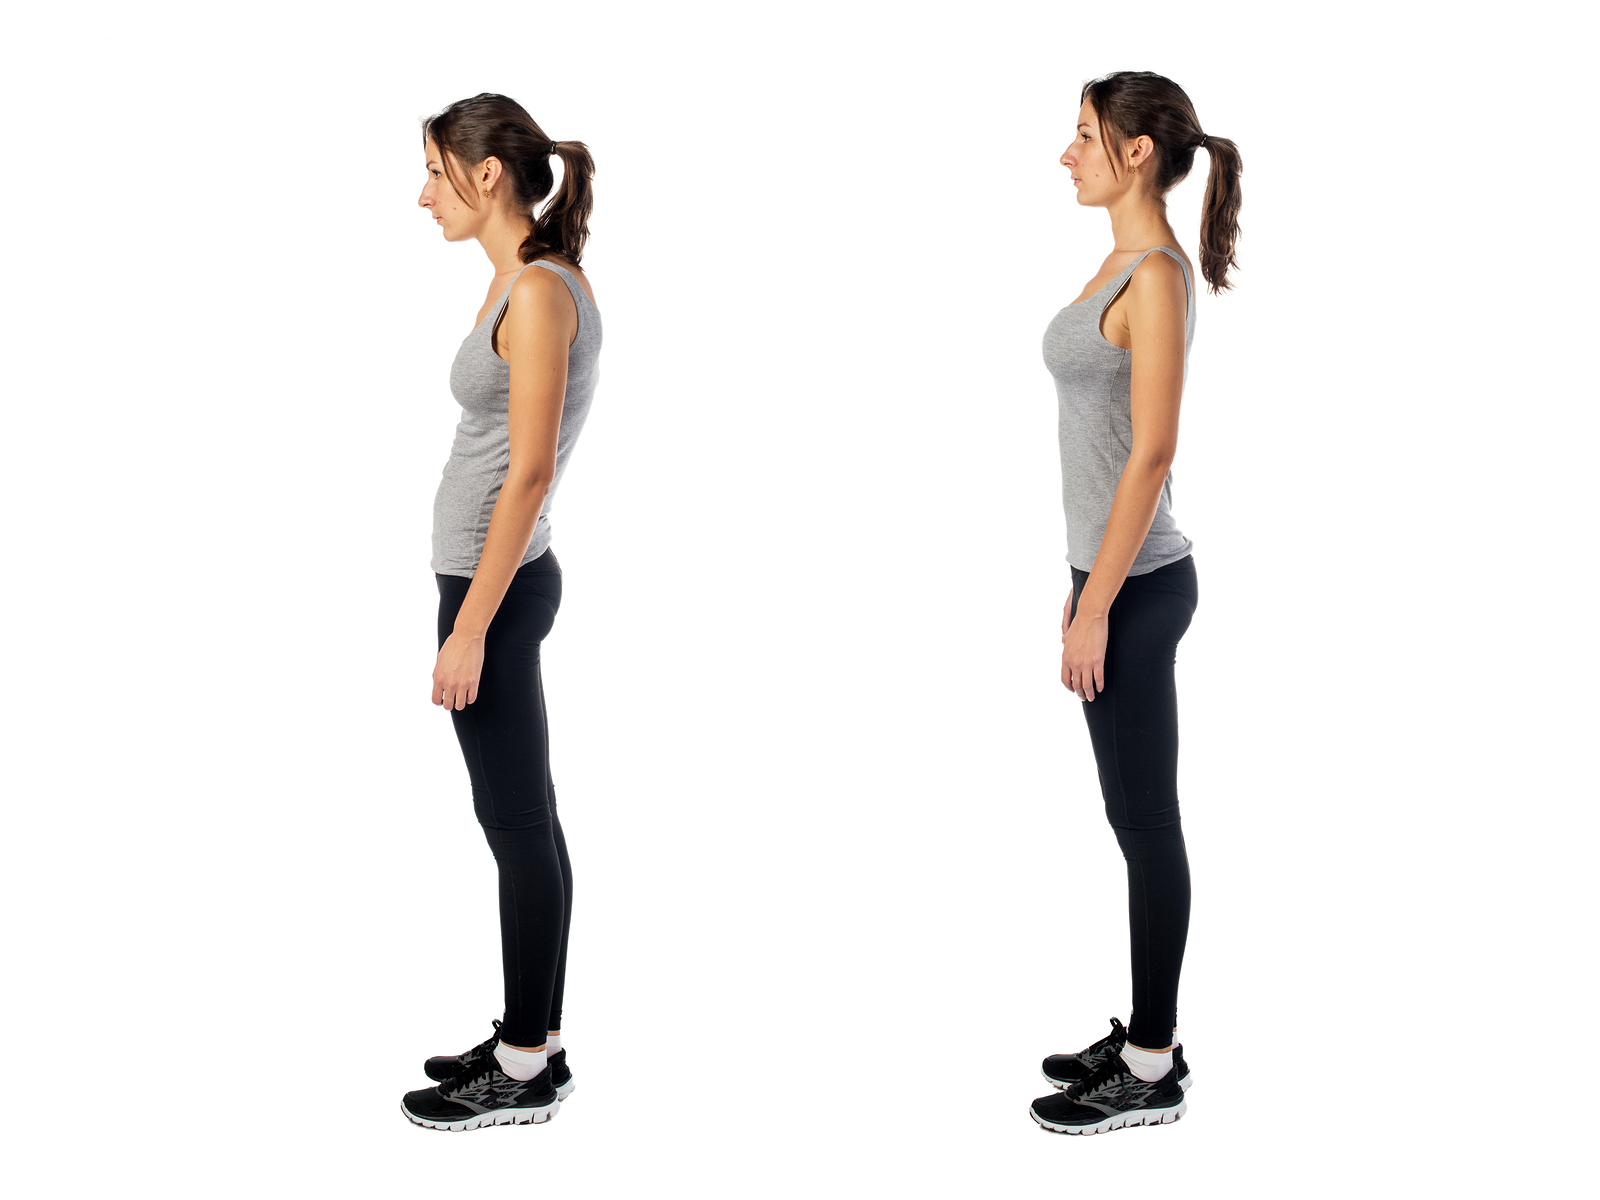 Guide on the Importance of Posture